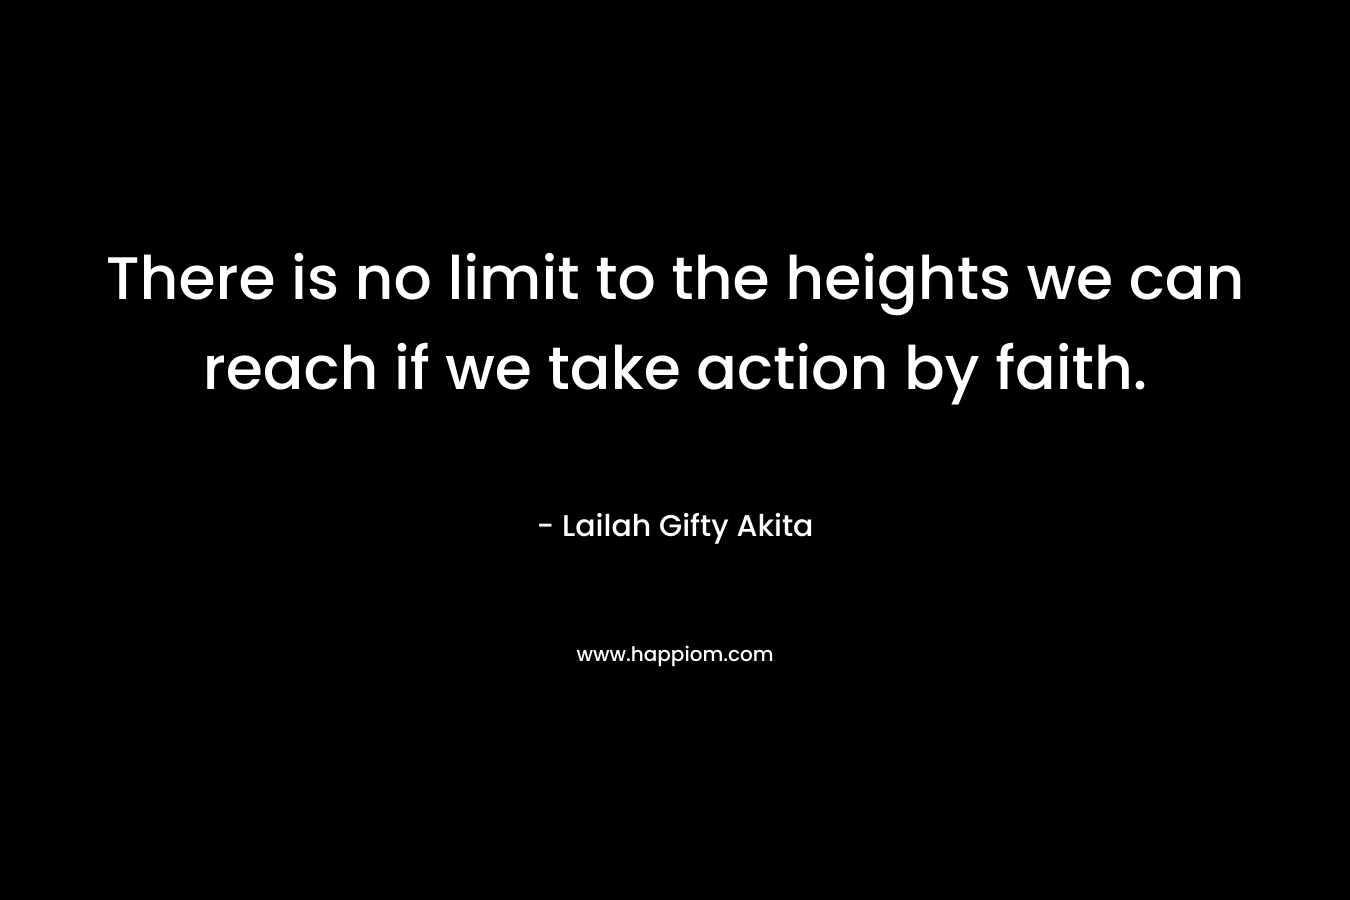 There is no limit to the heights we can reach if we take action by faith.